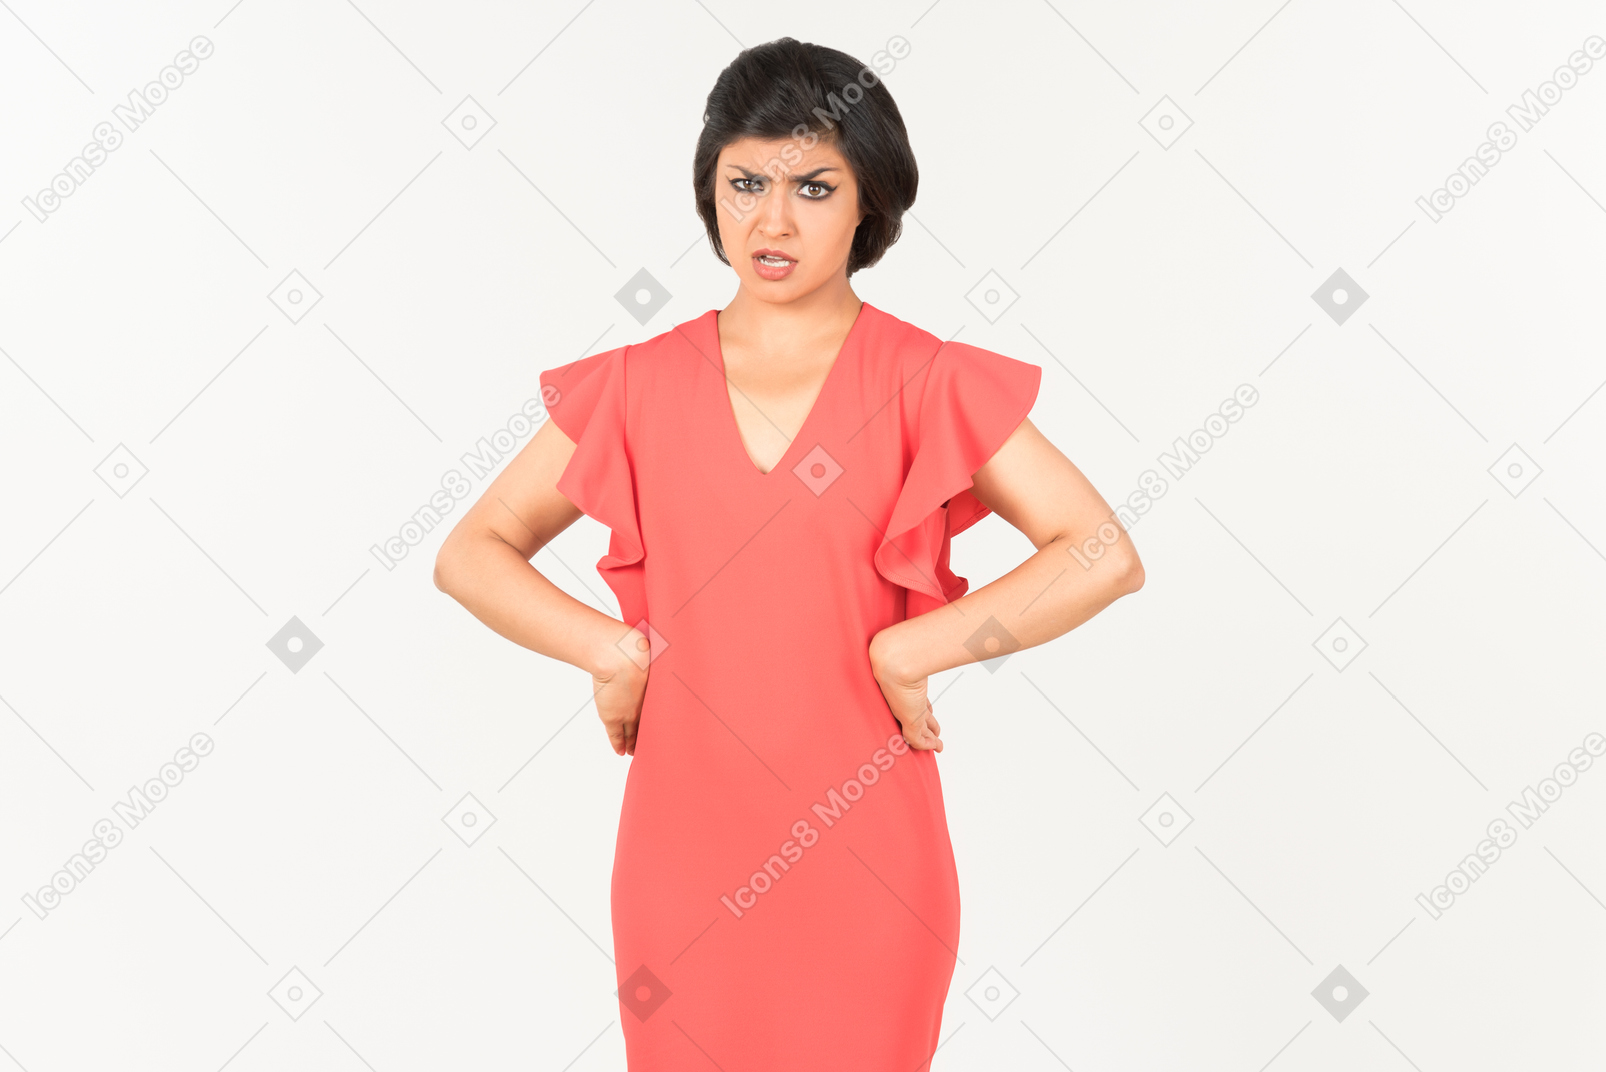 Mad looking young indian woman standing with hands on hips